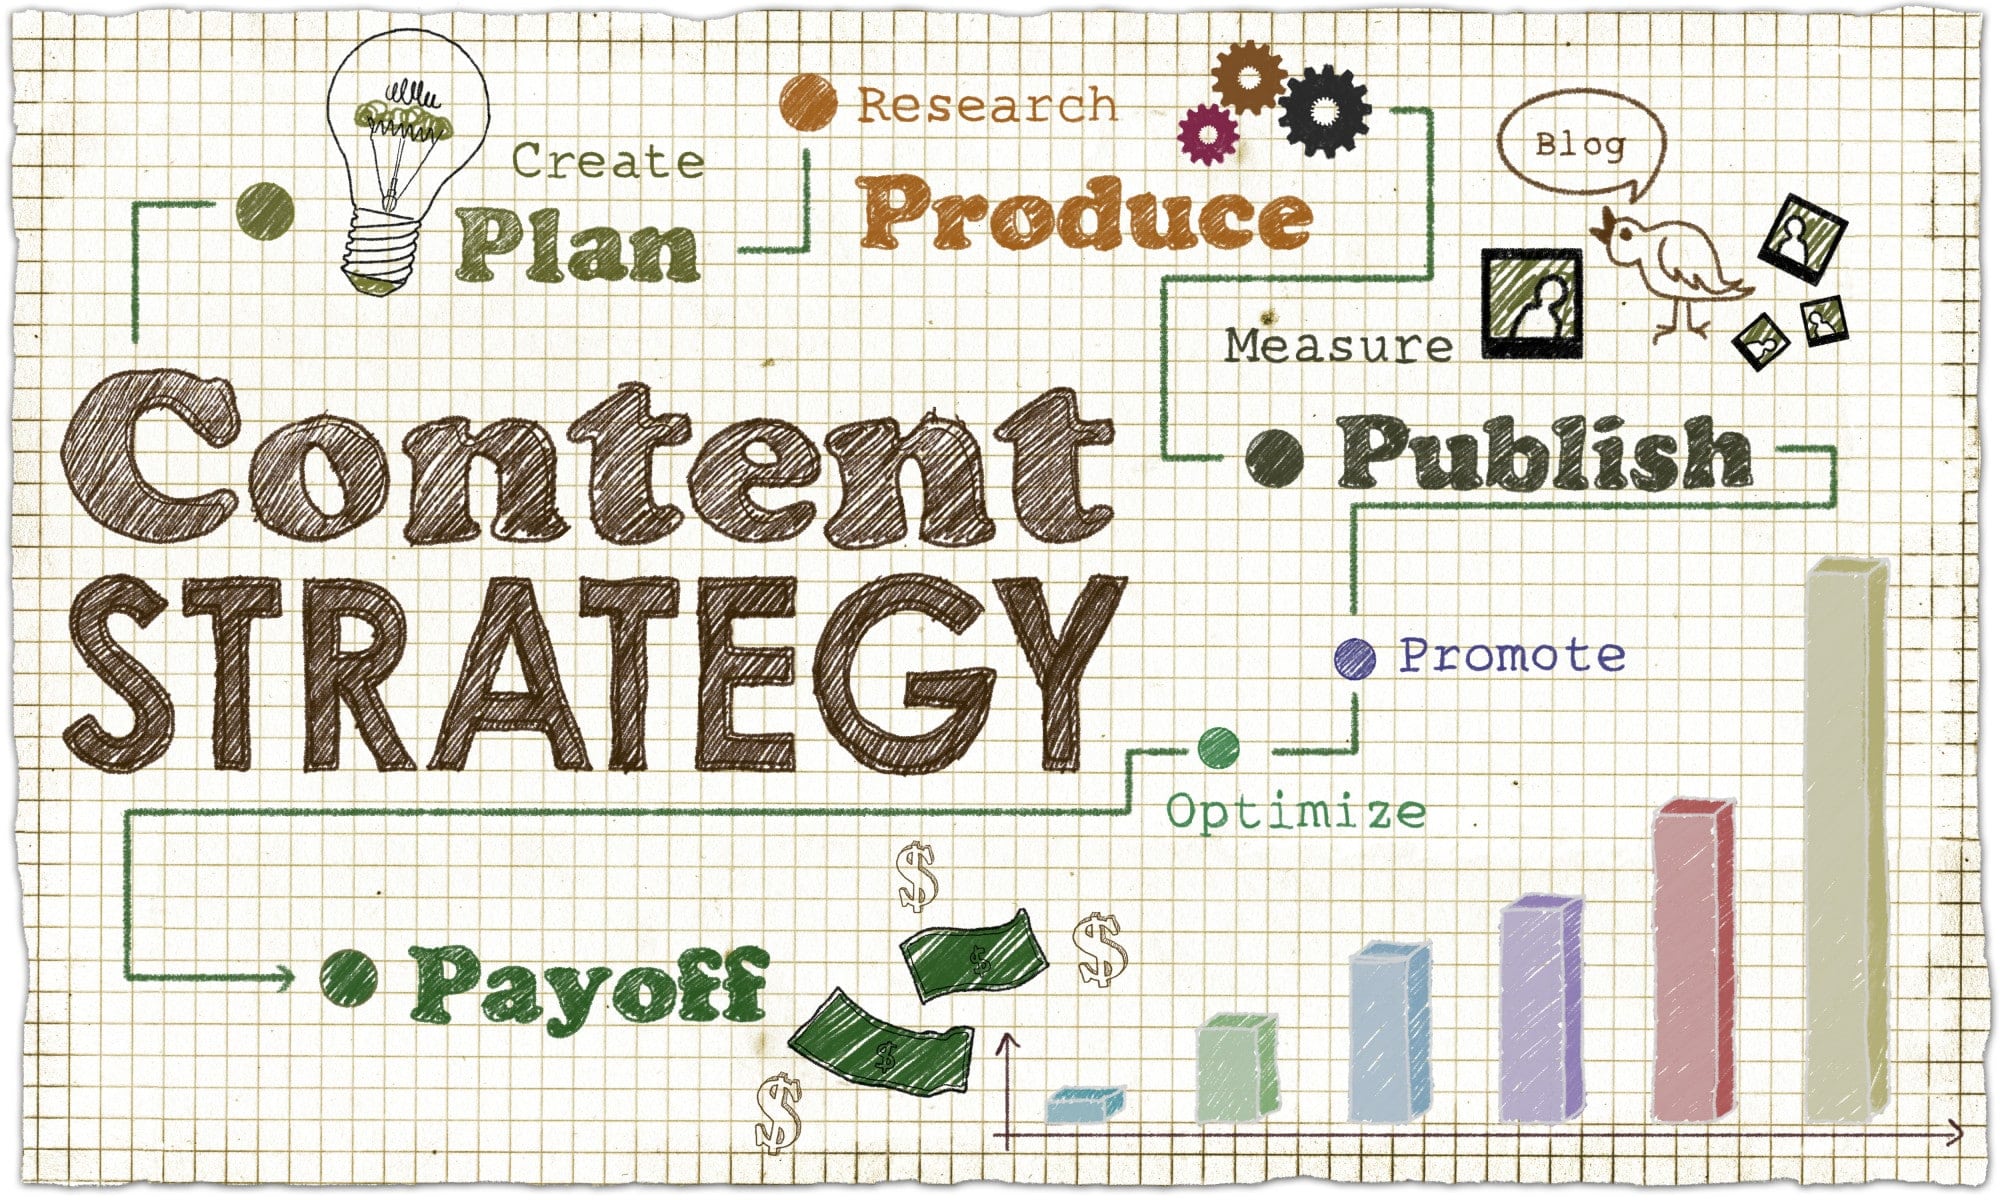 5 Signs Your SEO Content Strategy Isn't Effective